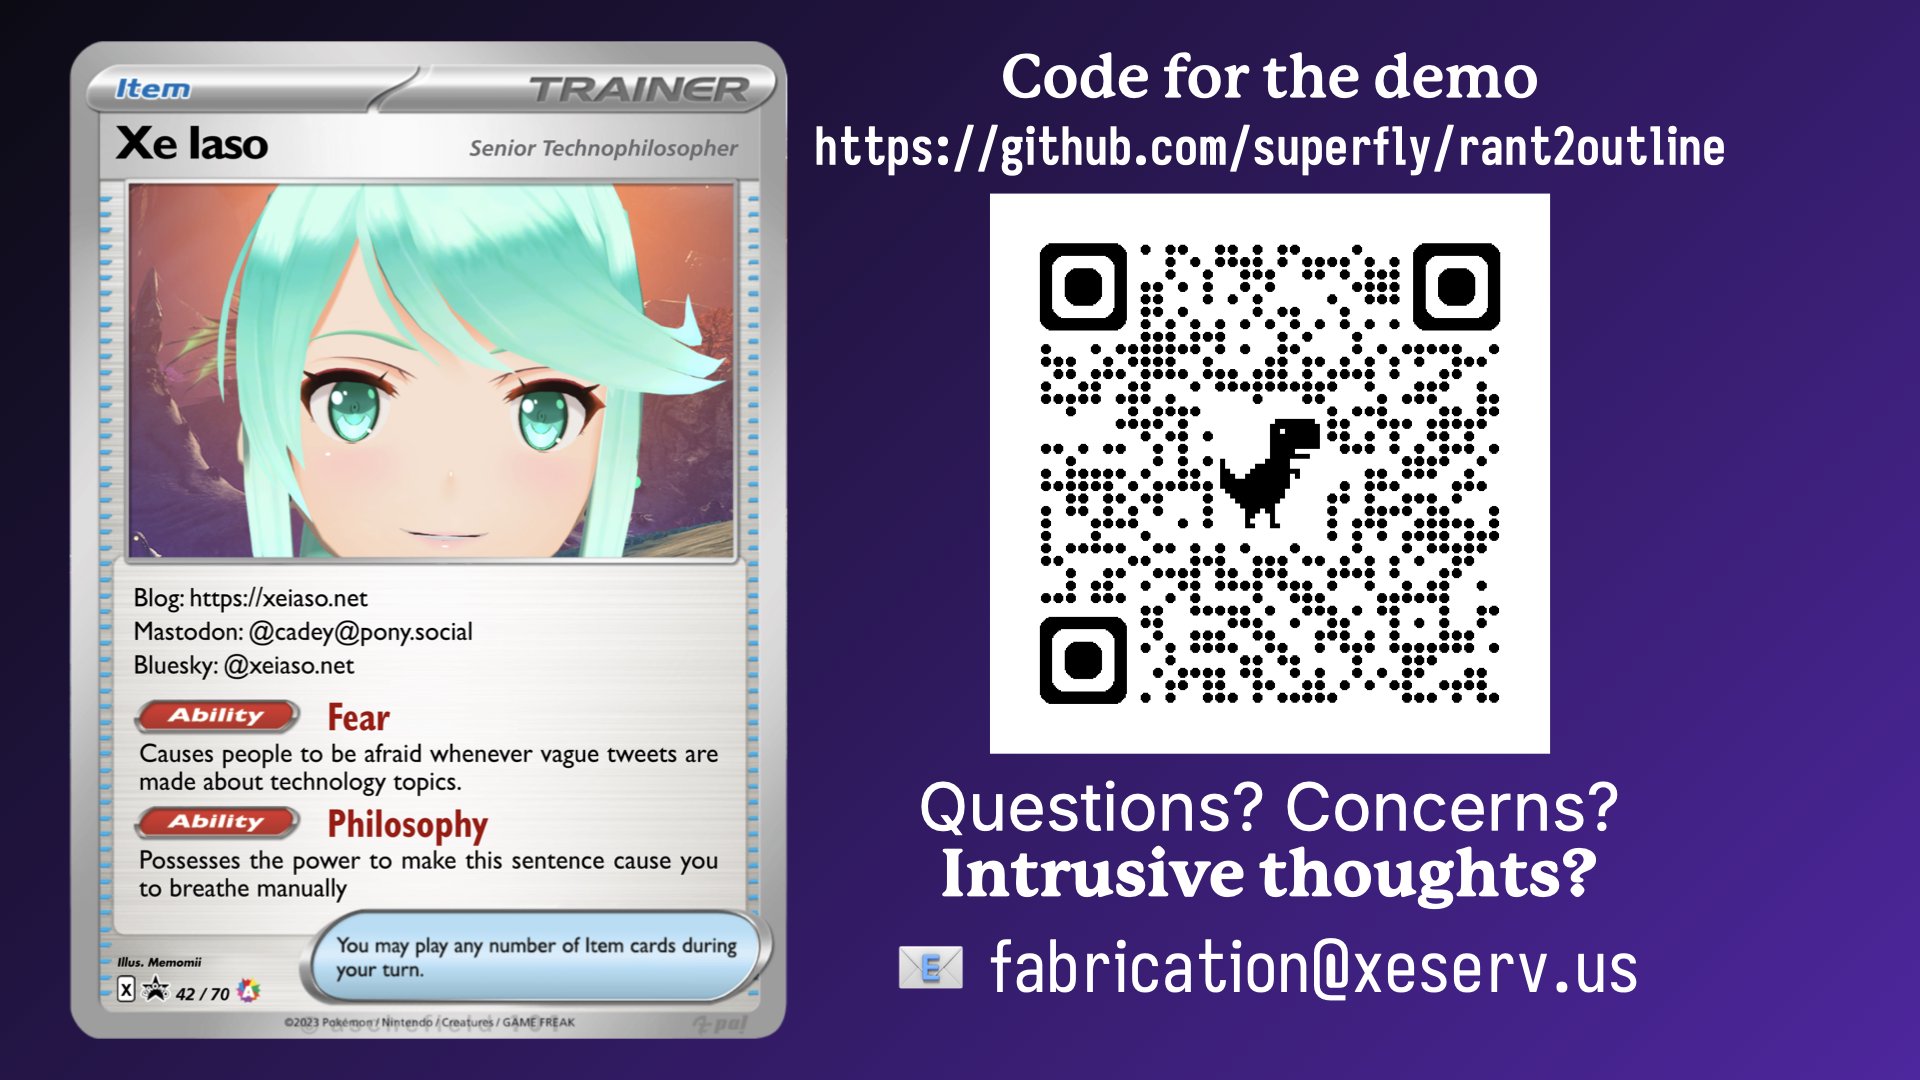 The conclusion slide showing a link to the source code of my demo, a mock pokemon card about the speaker, and an invitation to email questions to fabrication@xeserv.us.